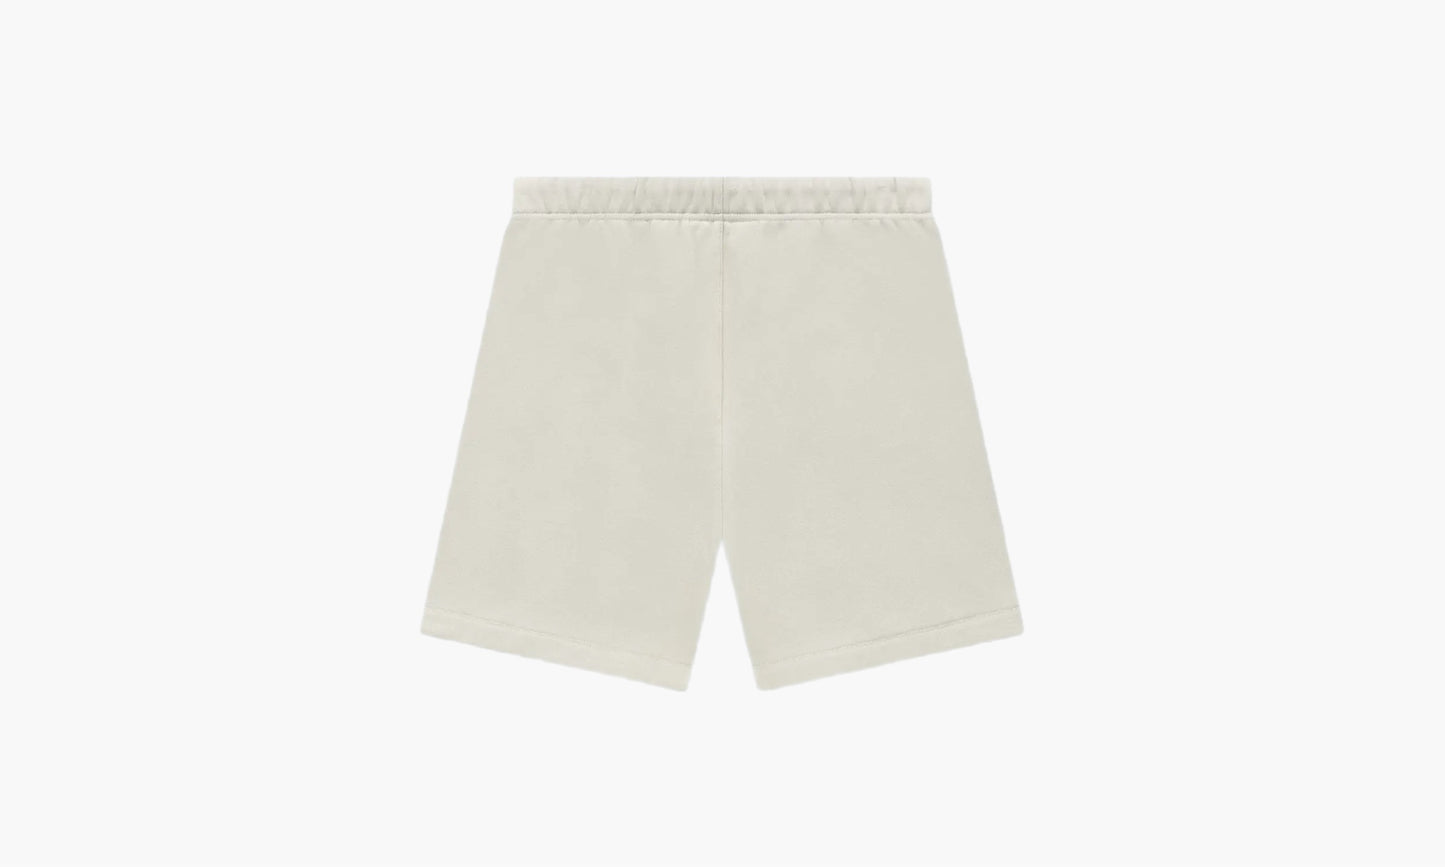 Fear of God Essentials Shorts Wheat | The Sortage